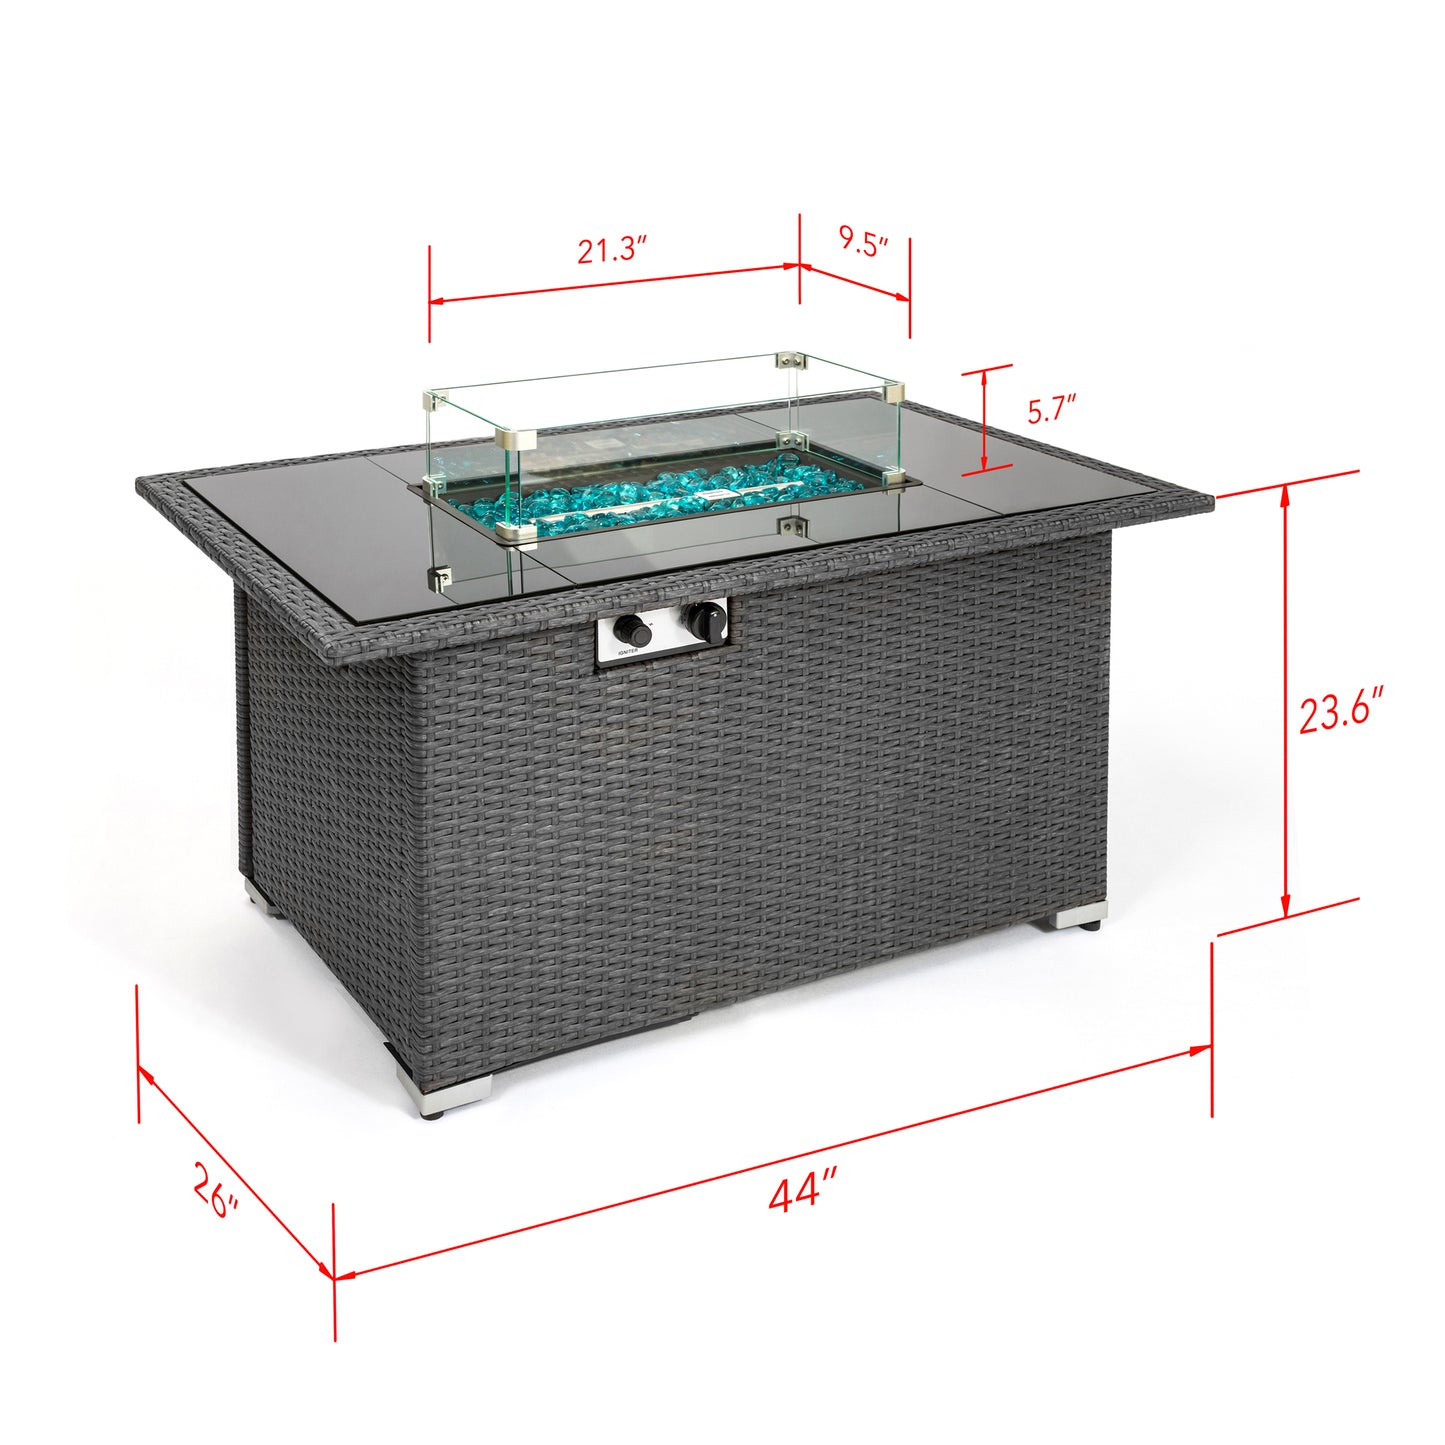 Outdoor Fire Pit, SYNGAR 44" 50,000 BTU Auto-Ignition Propane Fire Pit Table W/ Glass Wind Guard, Tempered Glass Tabletop, Lid, Rocks & Cover, 2-in-1 Gas Fire Pit for Patio Yard Poolside, C05